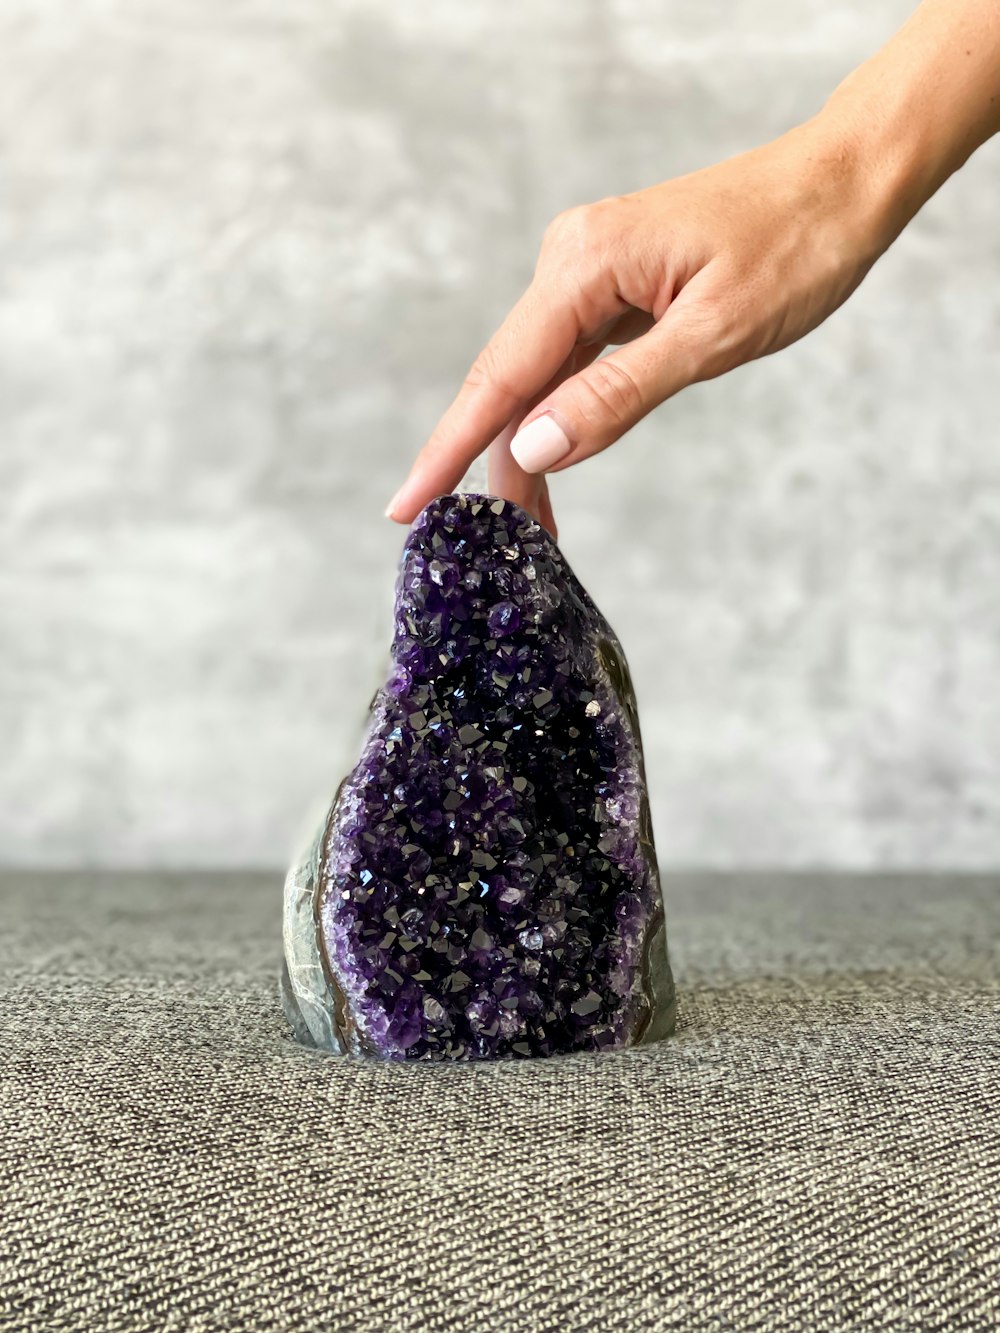 a person touching a rock with their hand